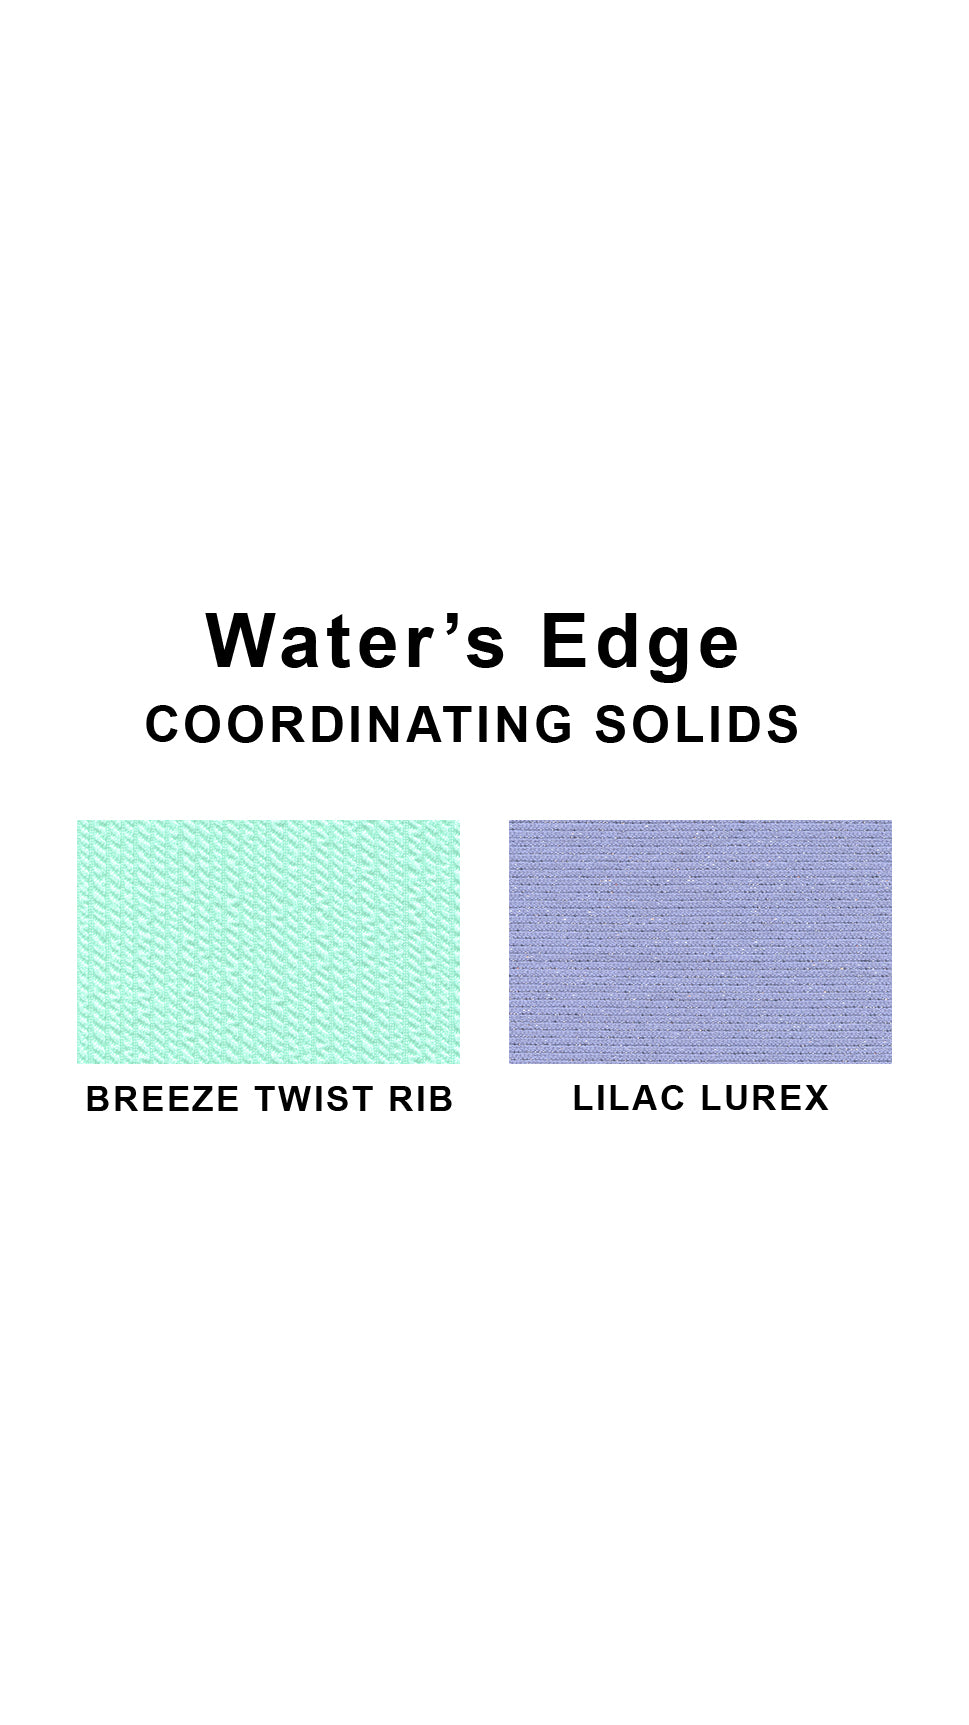 Coordinating solids chart for Water's Edge swimsuit print: Lilac Lurex and Breeze Twist Rib